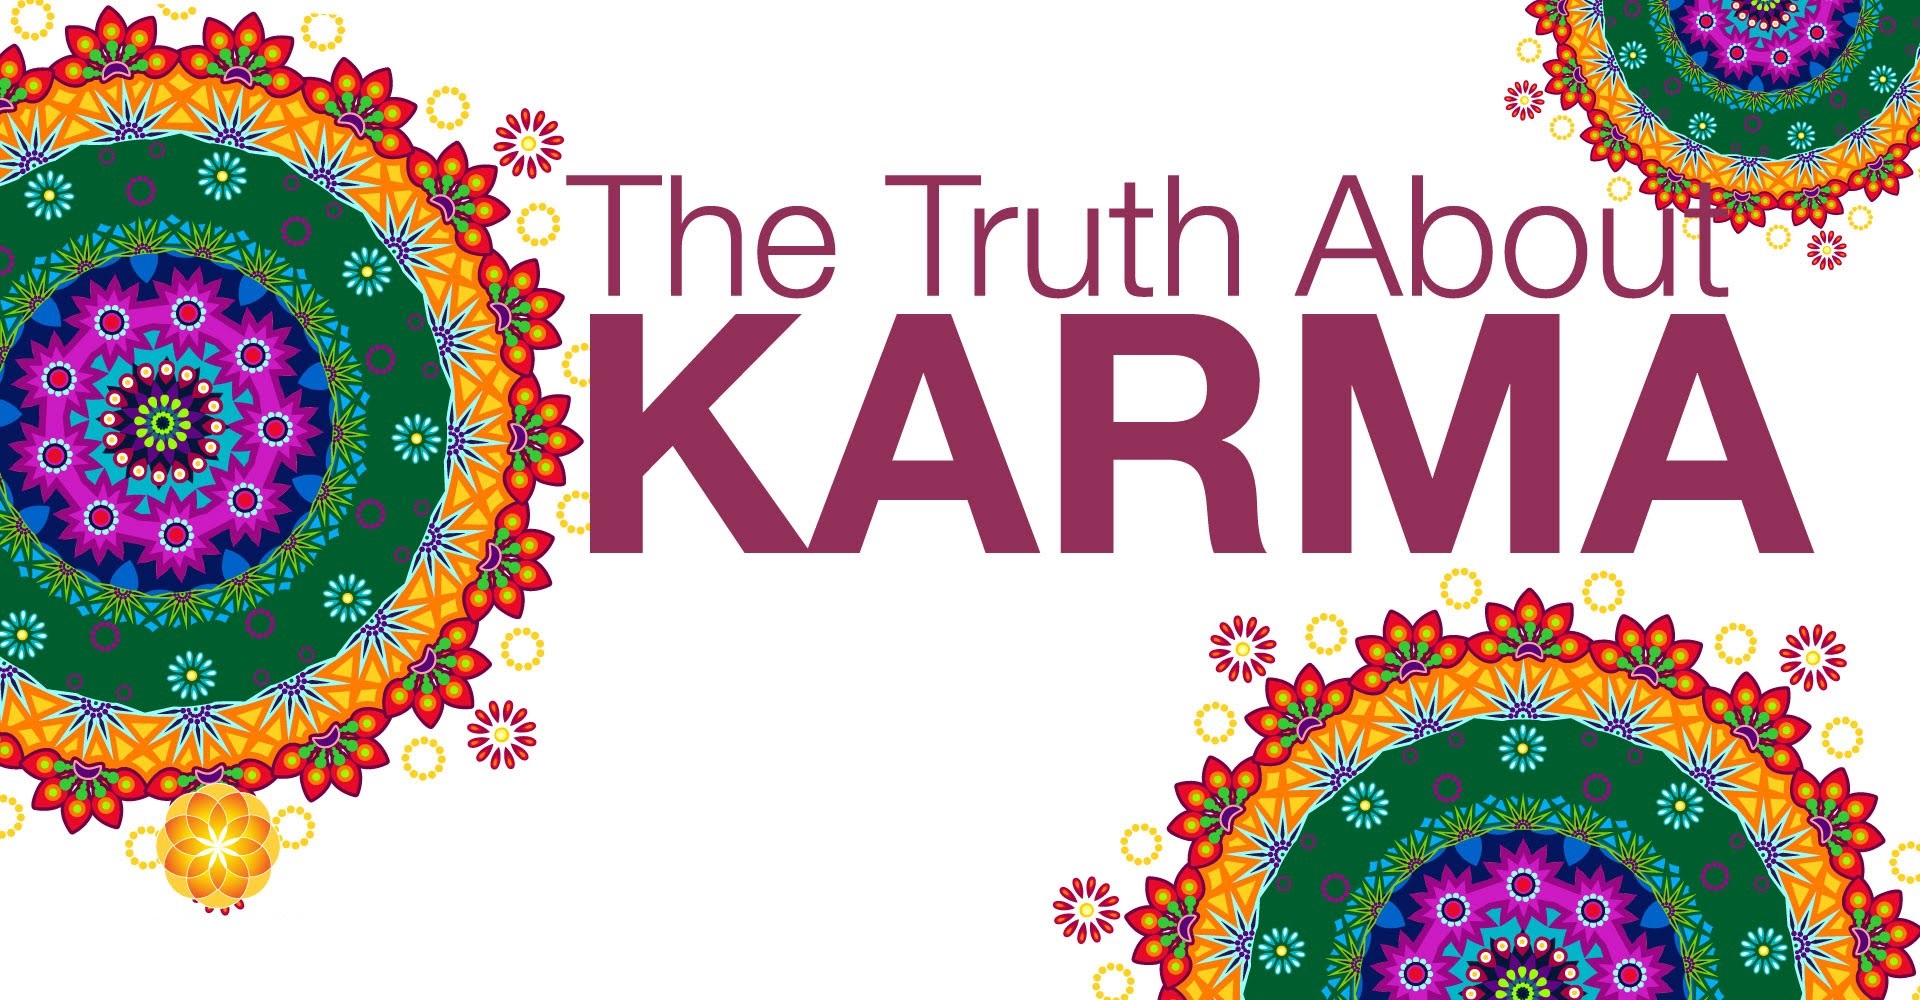 What You Don’t Know About Karma CAN Harm You! - fb